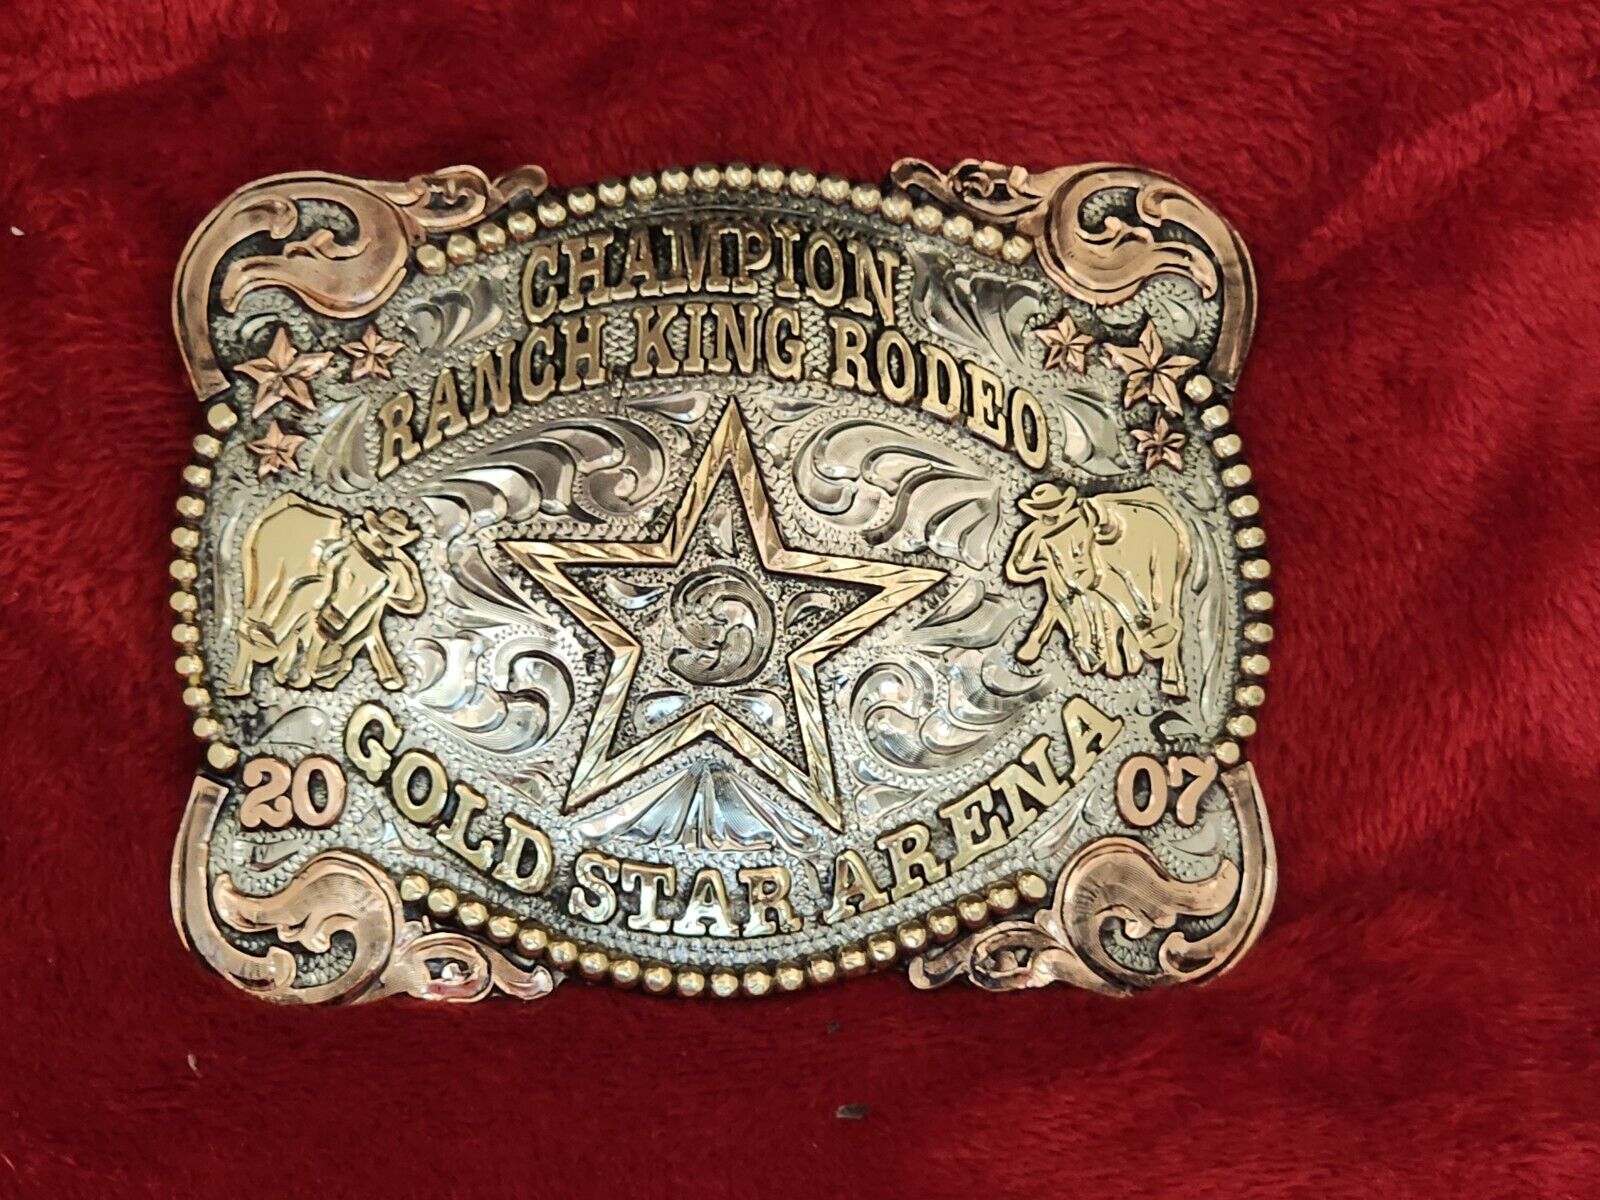 BULLDOGGING PROFESSIONAL RODEO CHAMPION TROPHY BUCKLE☆RANCH RODEO☆2007☆422